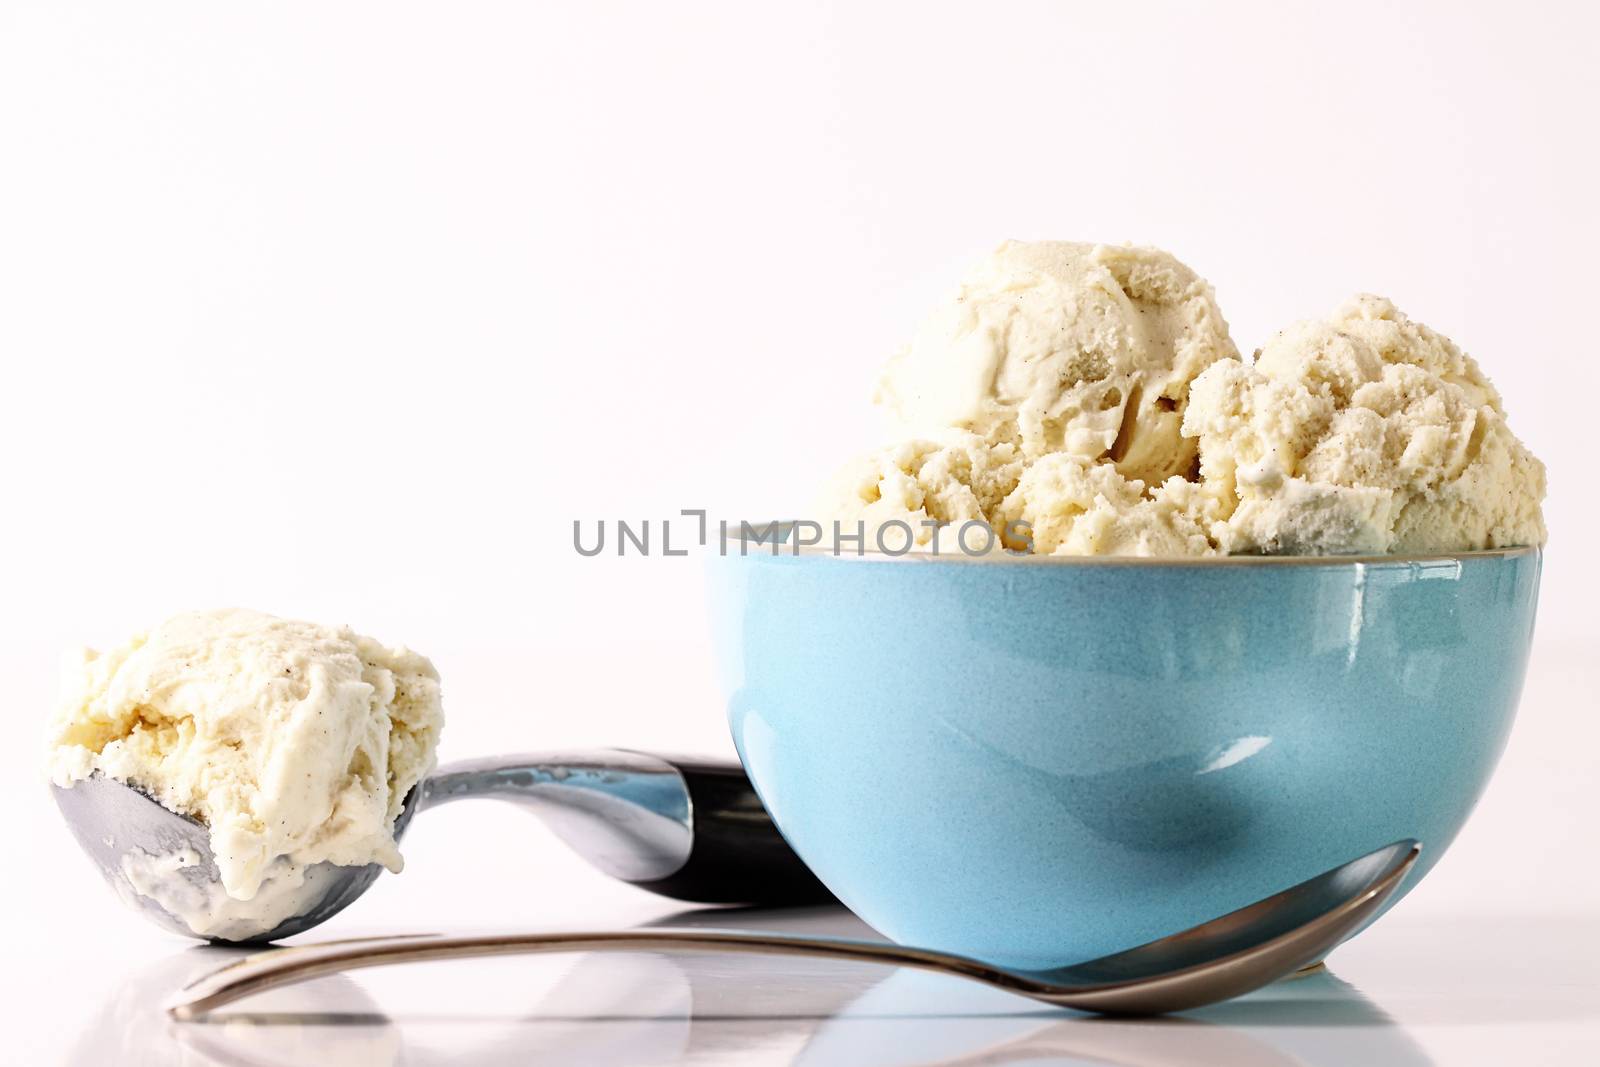 Vanilla ice cream in blue bowl with scooper and spoon